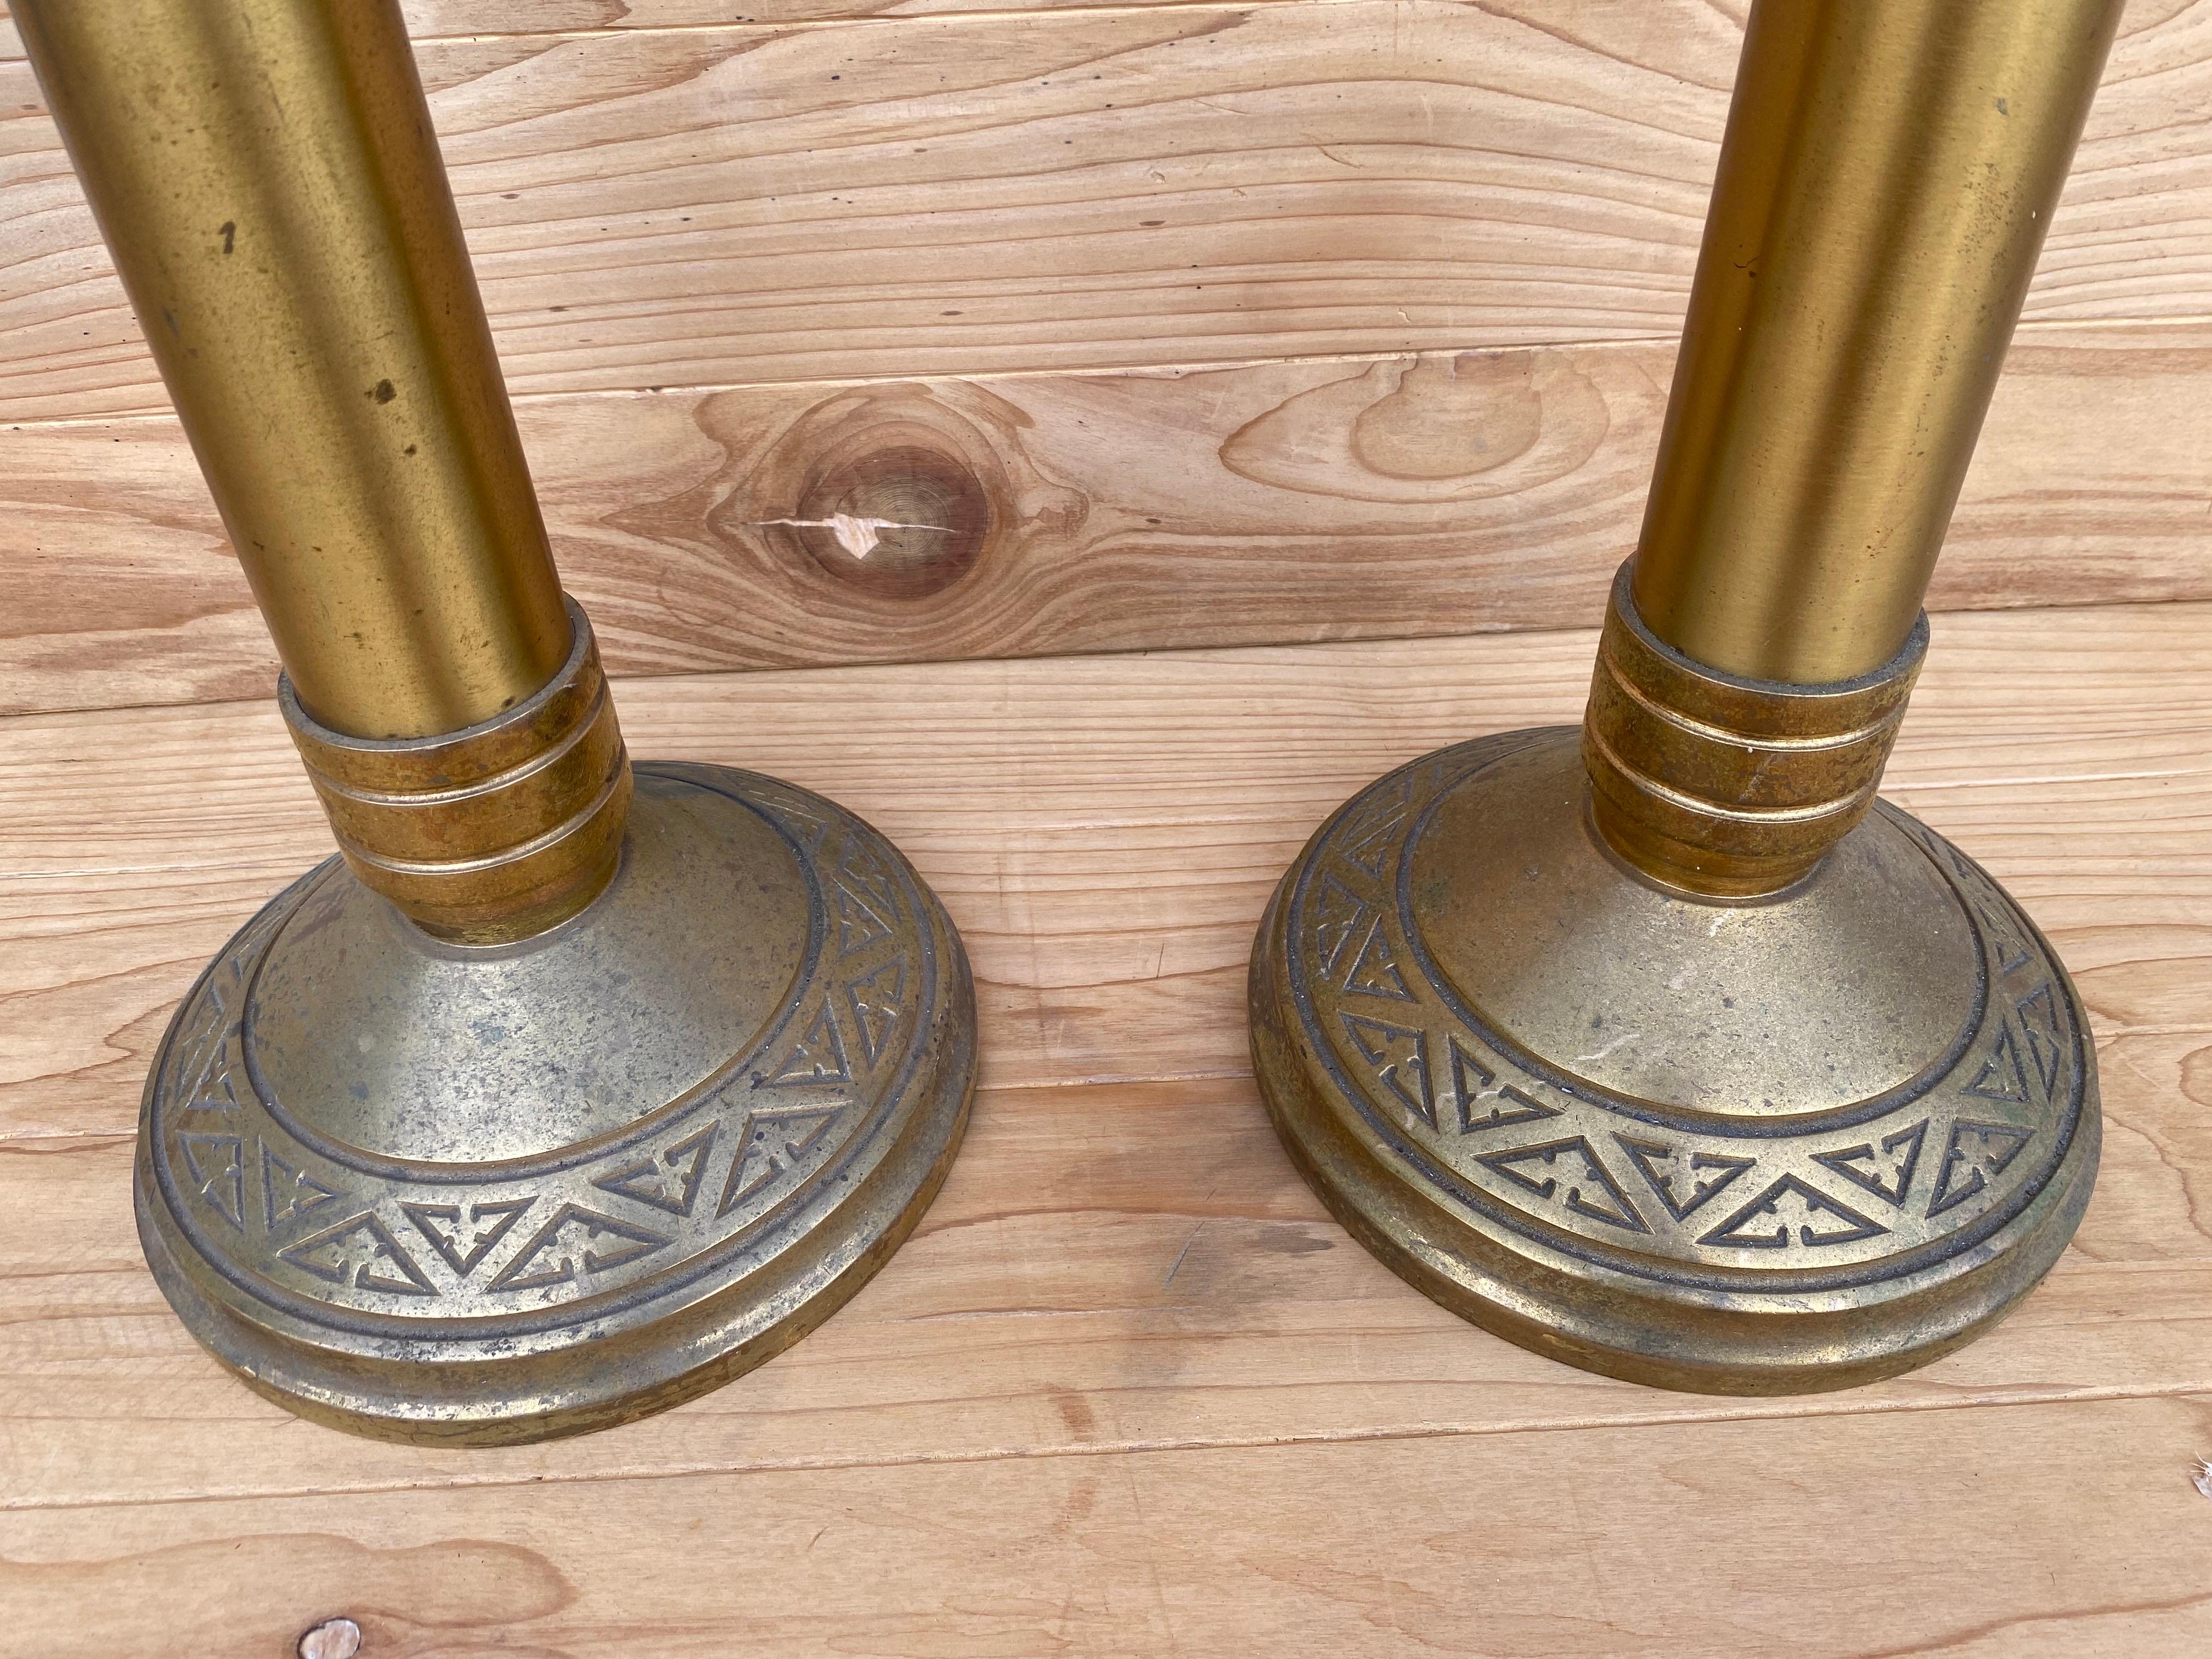 Antique Church Altar Floor Candle Holders

This pair of tall candleholders would be a sumptuous statement piece on your dining room table. The wax plates and bases of each stick have matching abstract triangle motifs. One candlestick has more patina